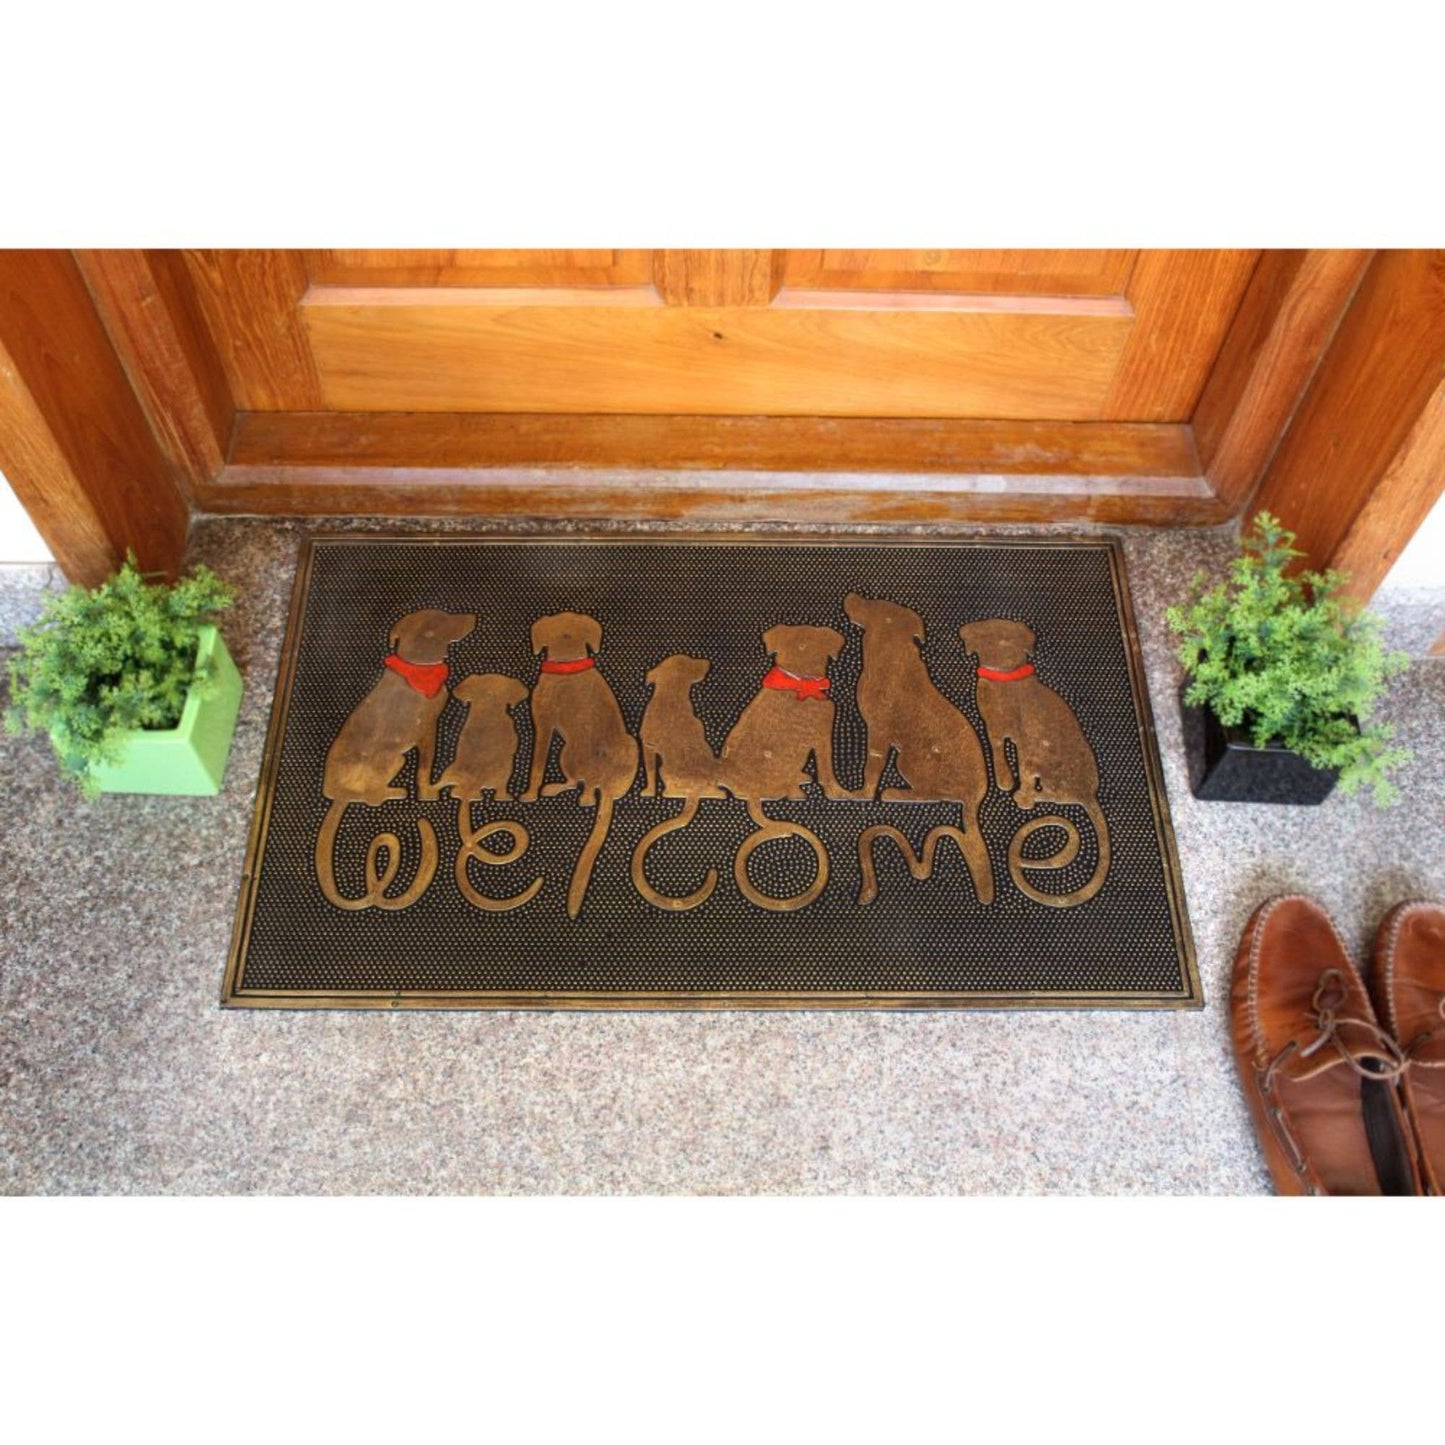 RugSmith Moulded Dog Welcome Rubber Doormat, 18" x 30"Heart